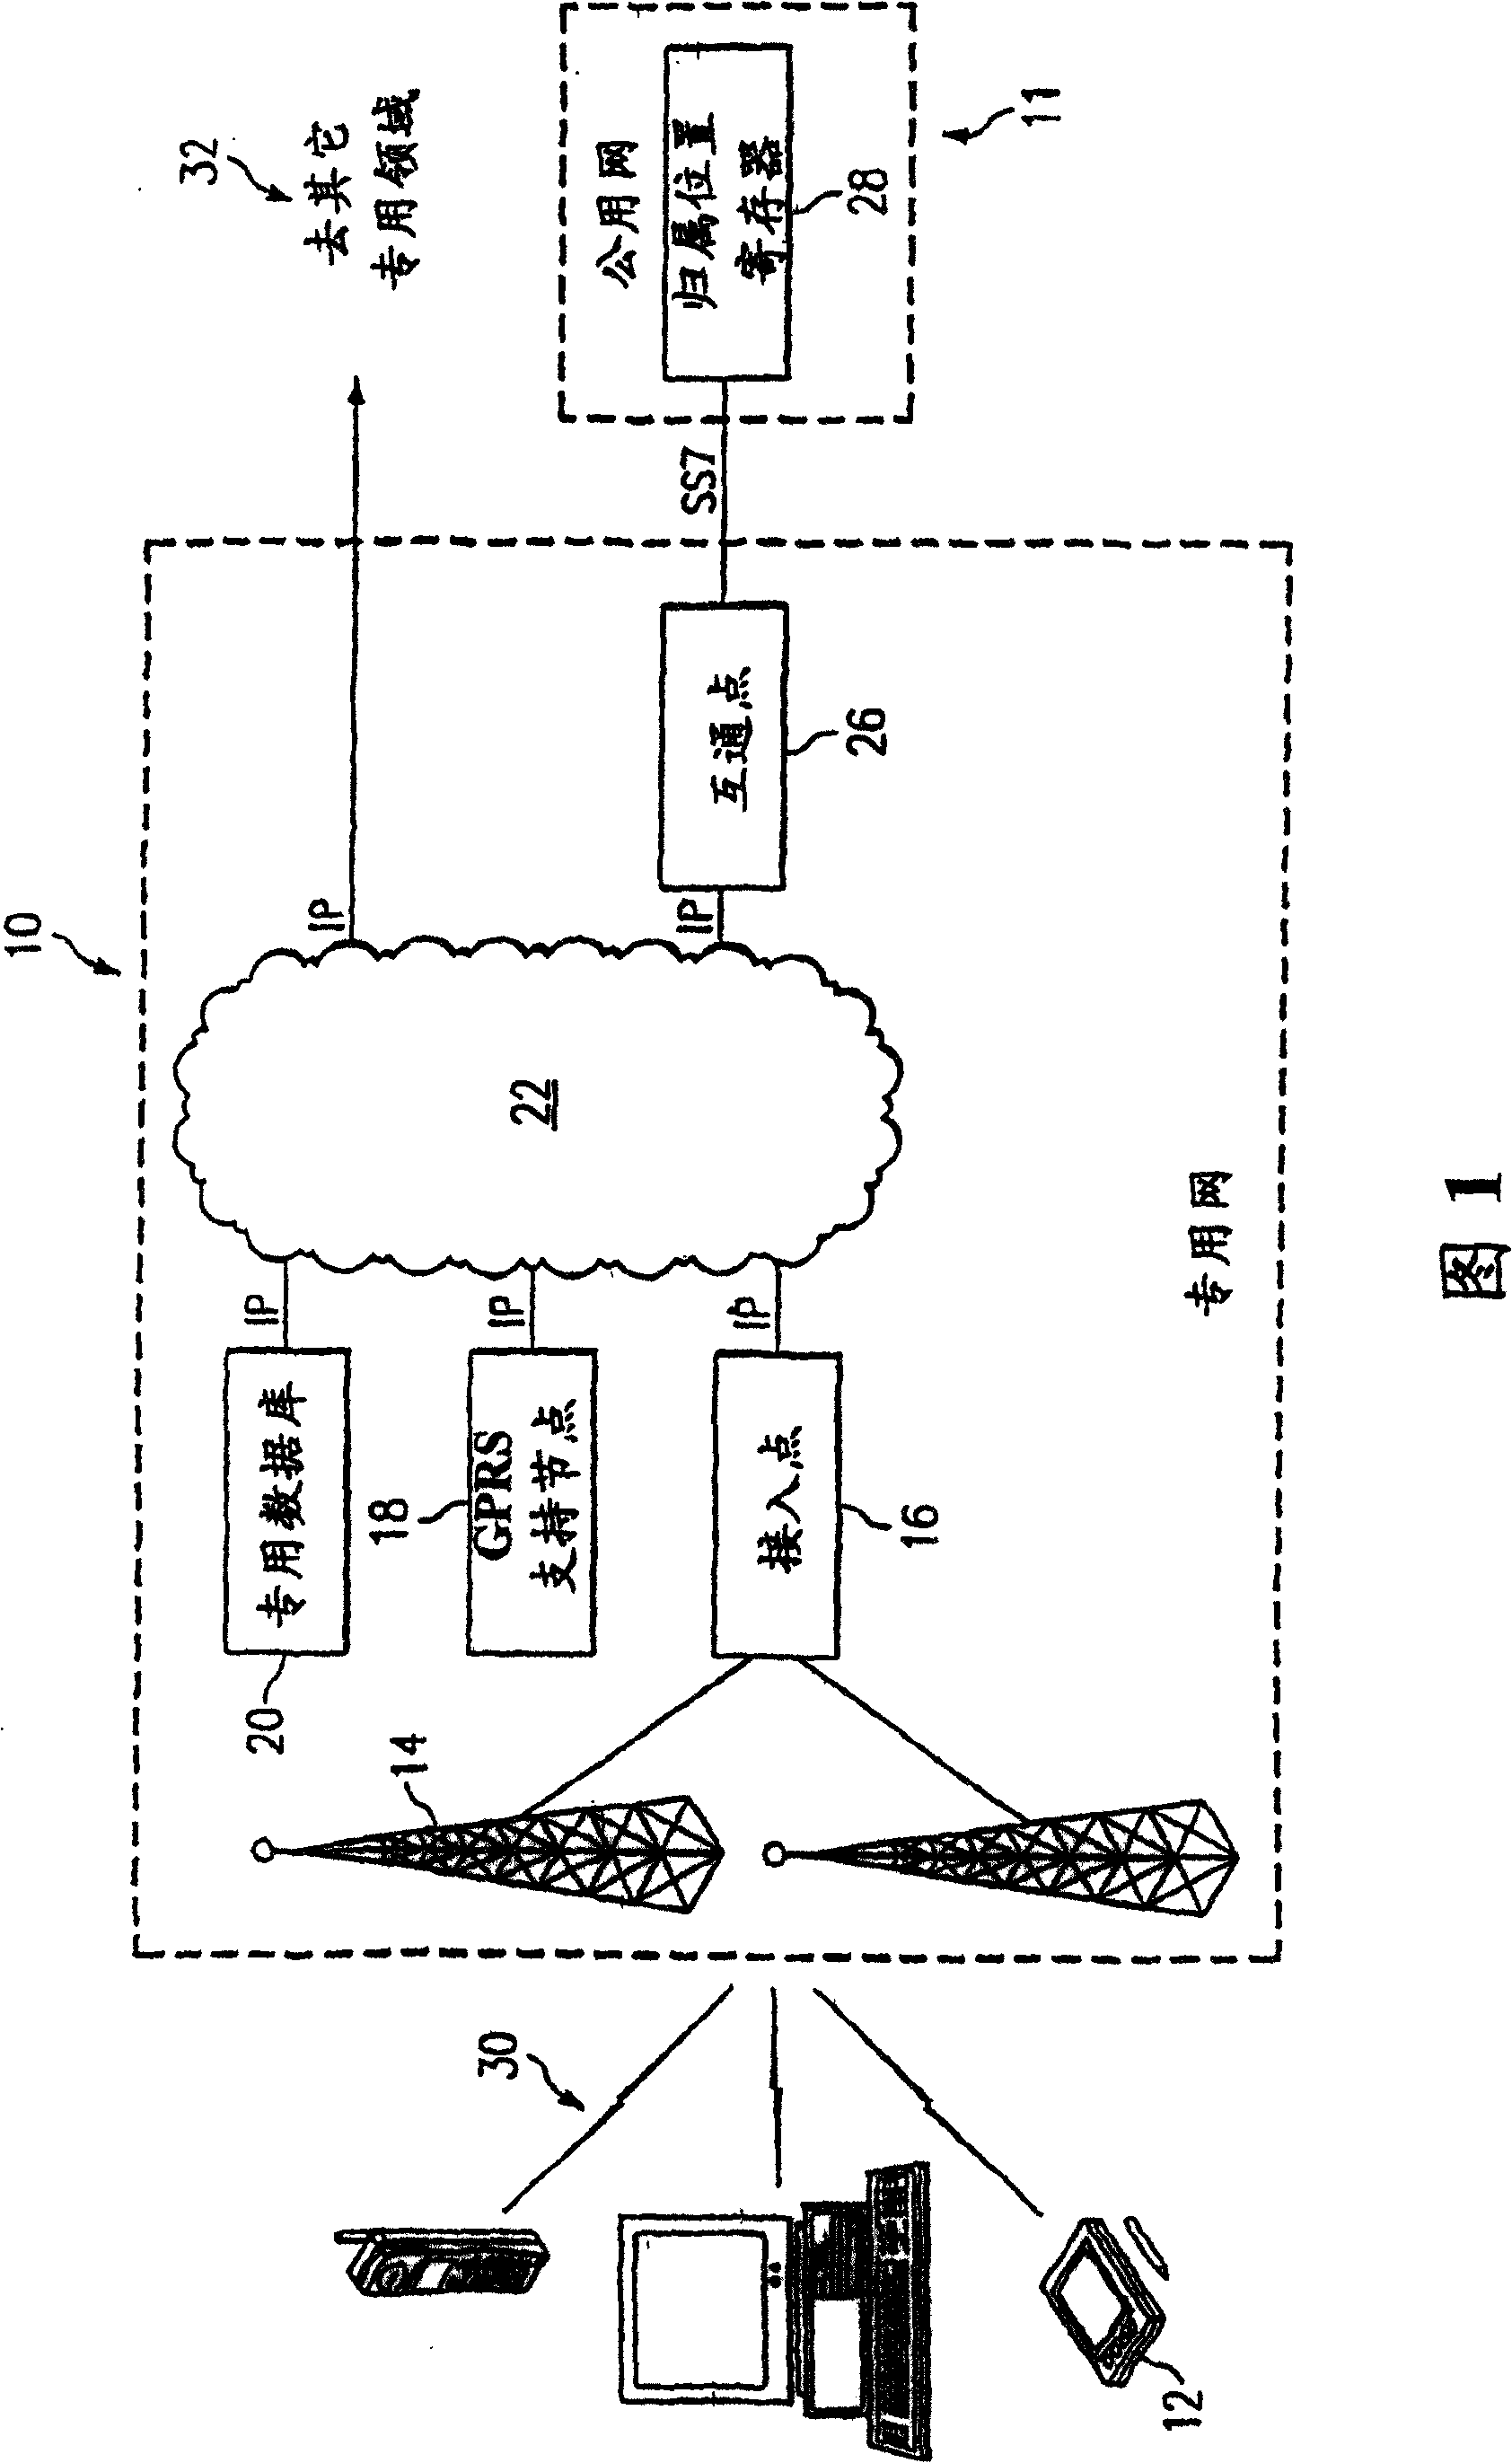 System and method for providing general packet radio services (GPRS) in private wireless network